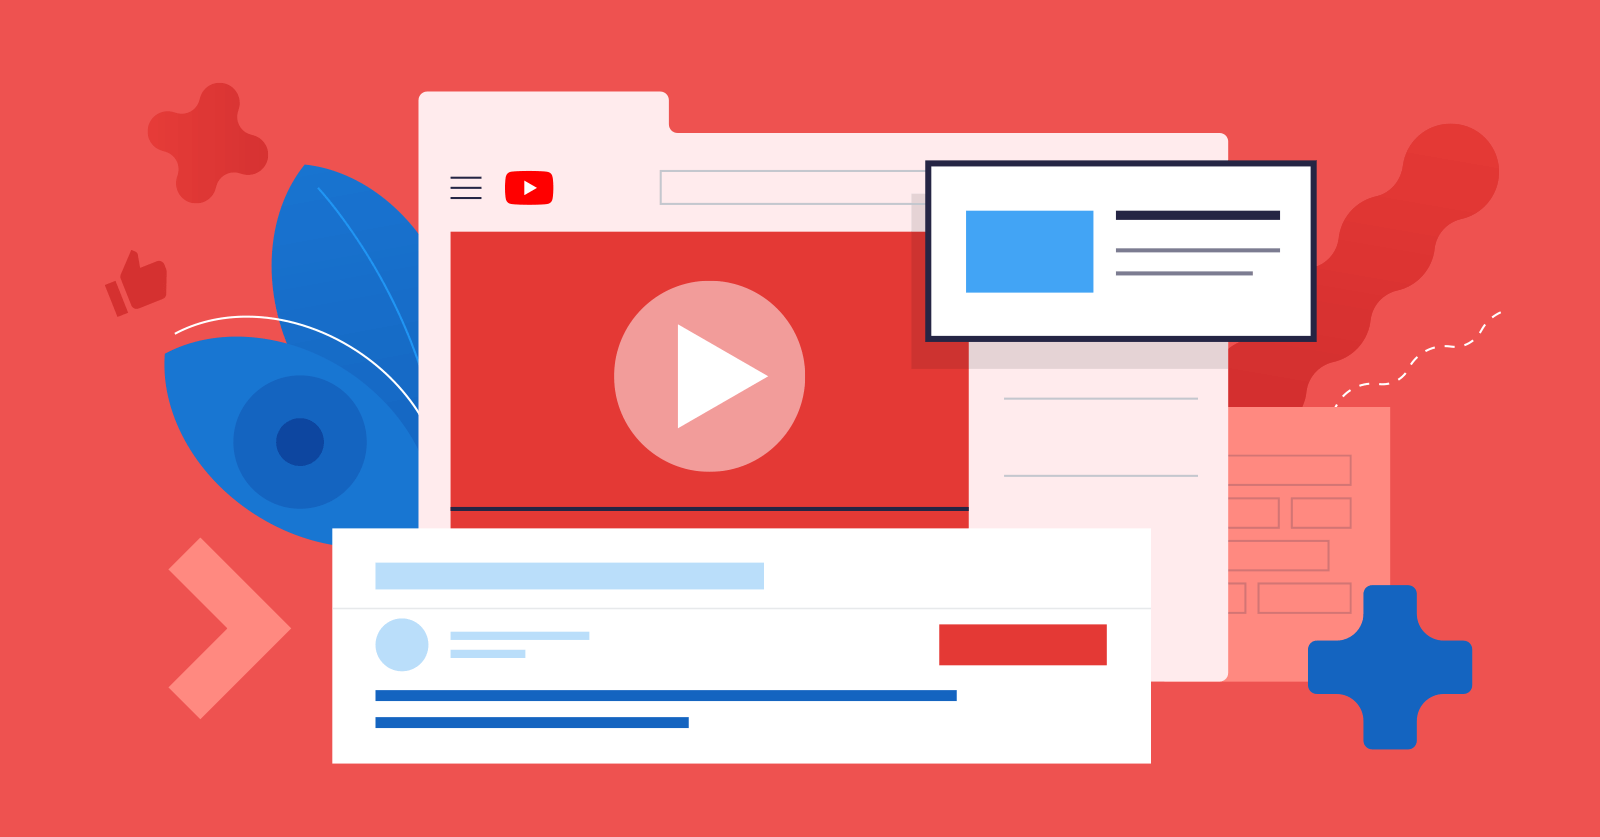 17 Ways to Get More Views on YouTube